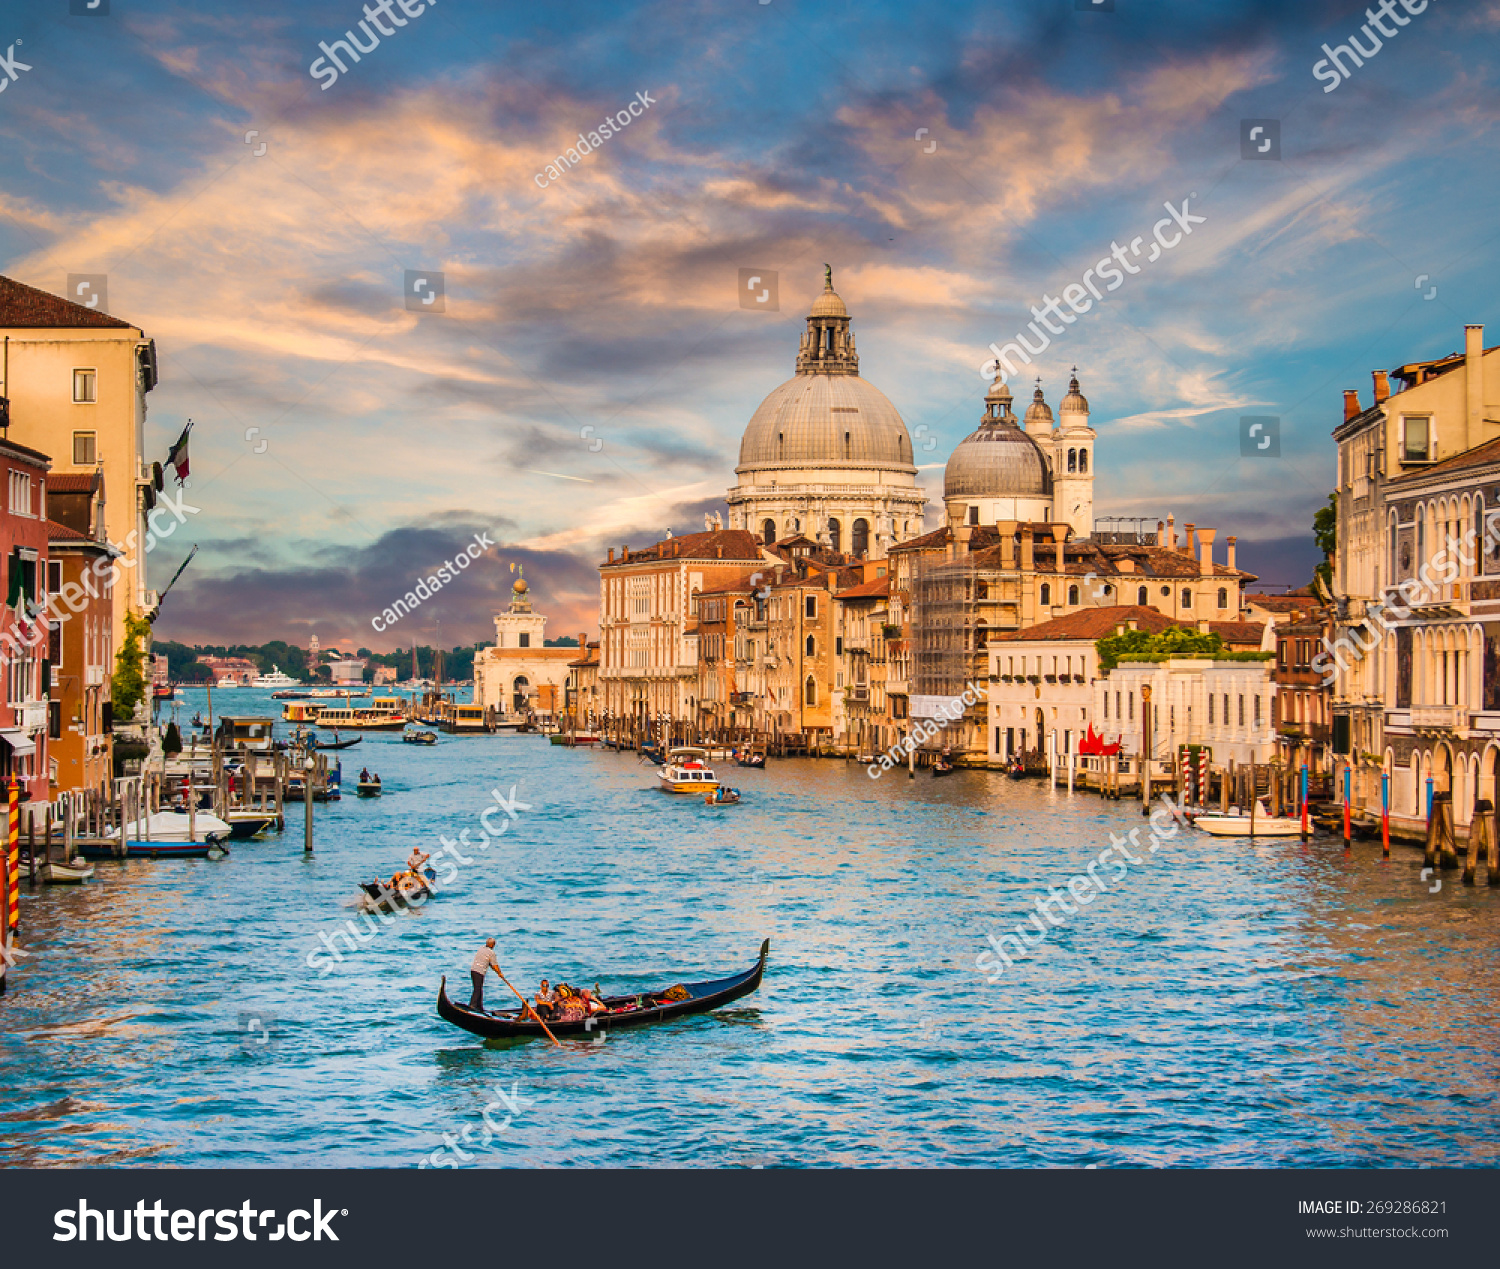 Panoramic view of traditional Gondola on famous Canal Grande with Basilica di Santa Maria della Salute in beautiful golden evening light at sunset in Venice, Italy #269286821